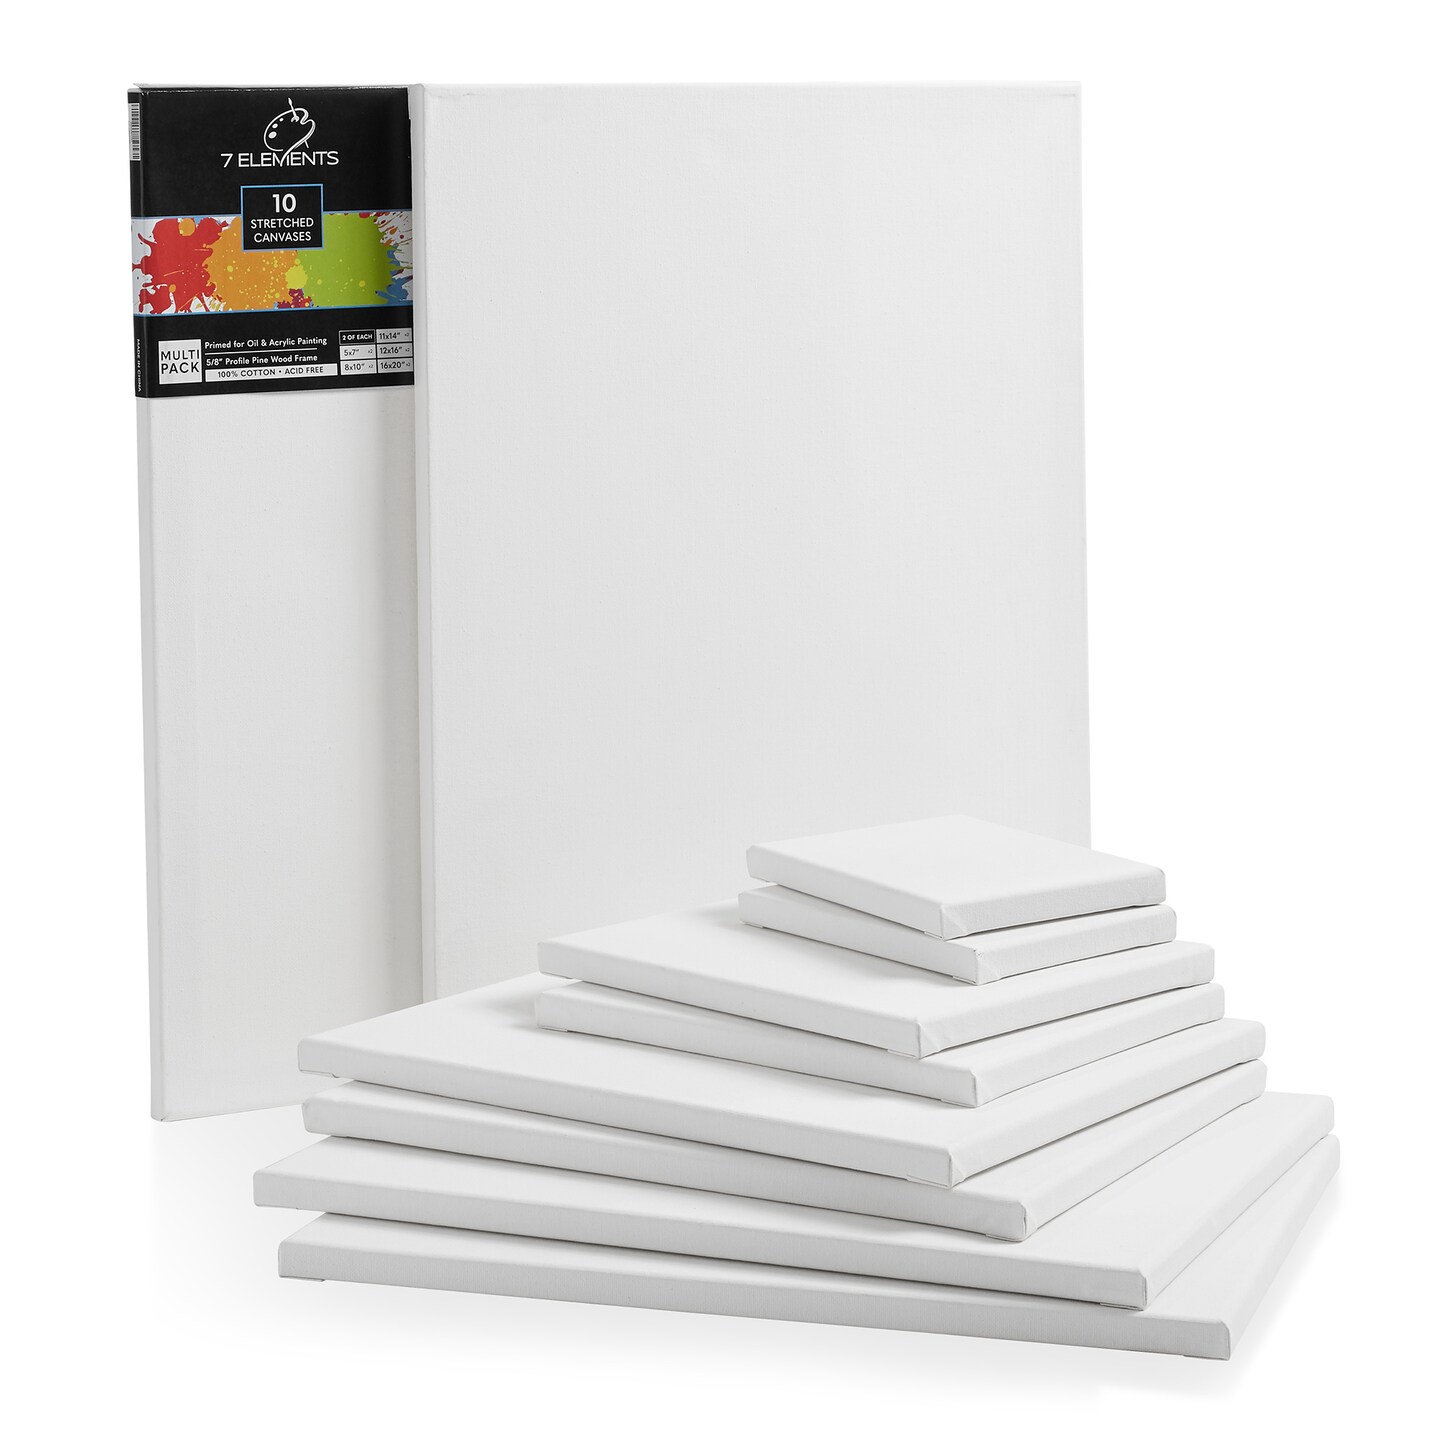 10 Pack Black Stretched Canvas for Painting 8x10 Blank Art Canvases for Paint